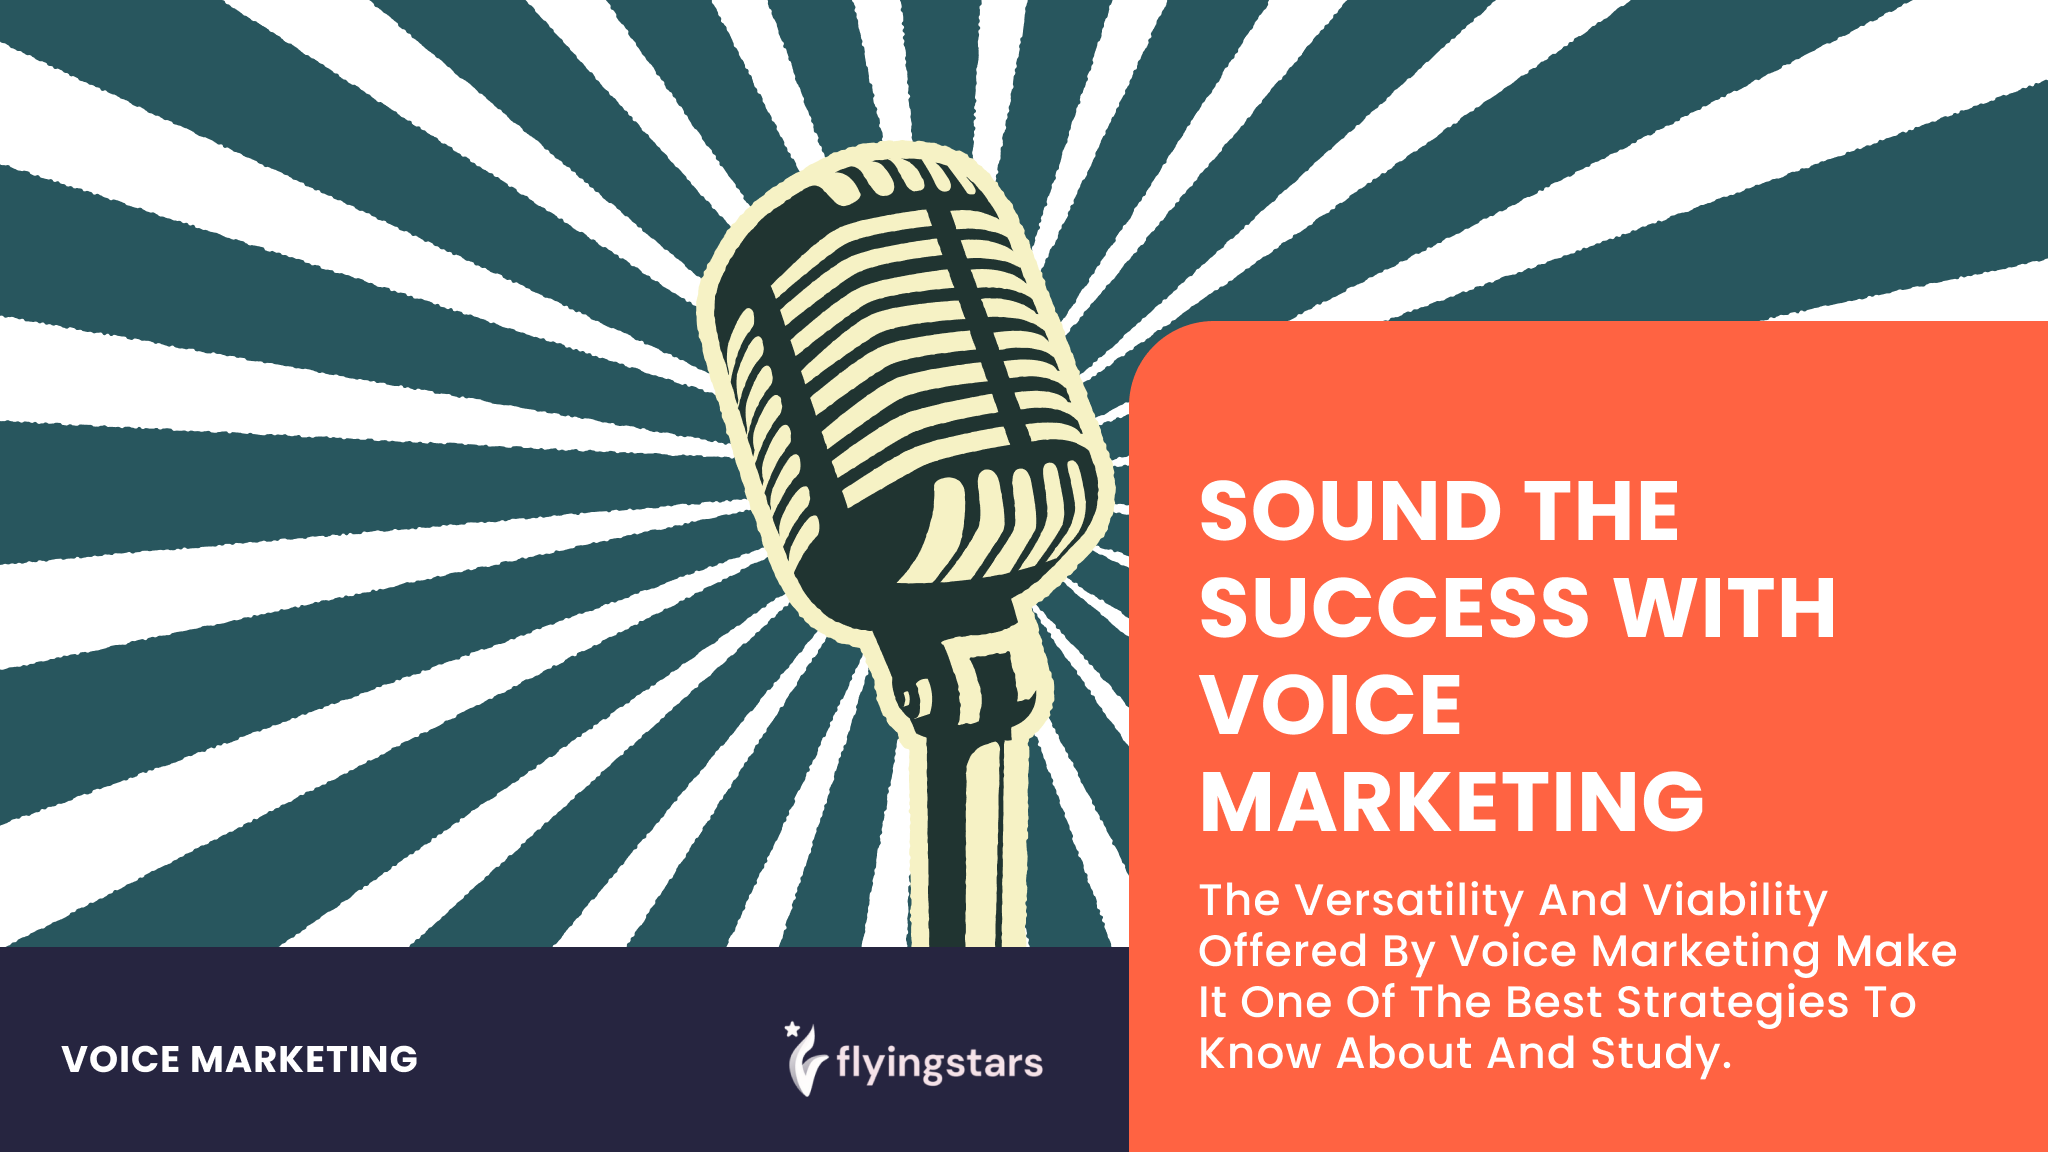 Sound the Success with Voice Marketing